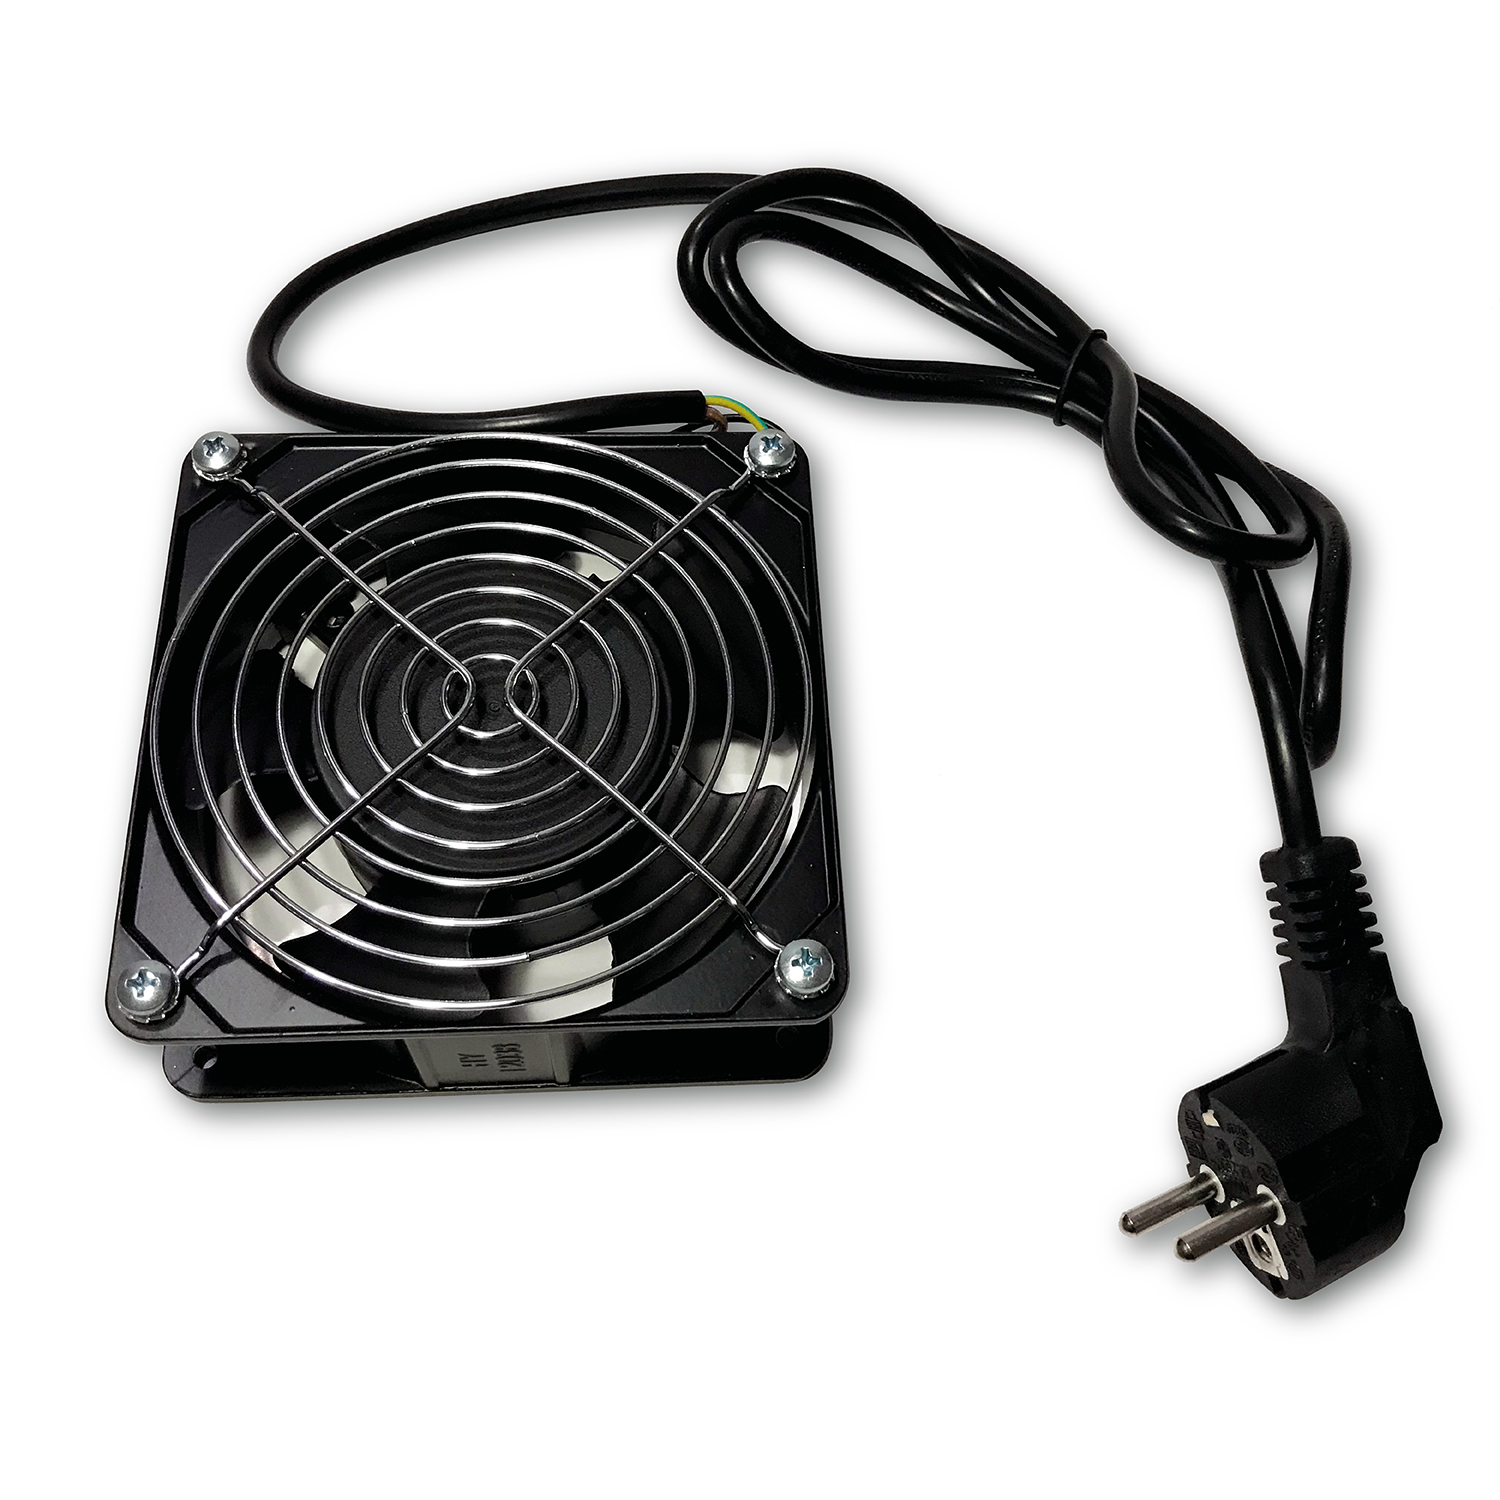 220V Ceiling Cooling Fan for Rack, Schuko Plug, 2m Cable